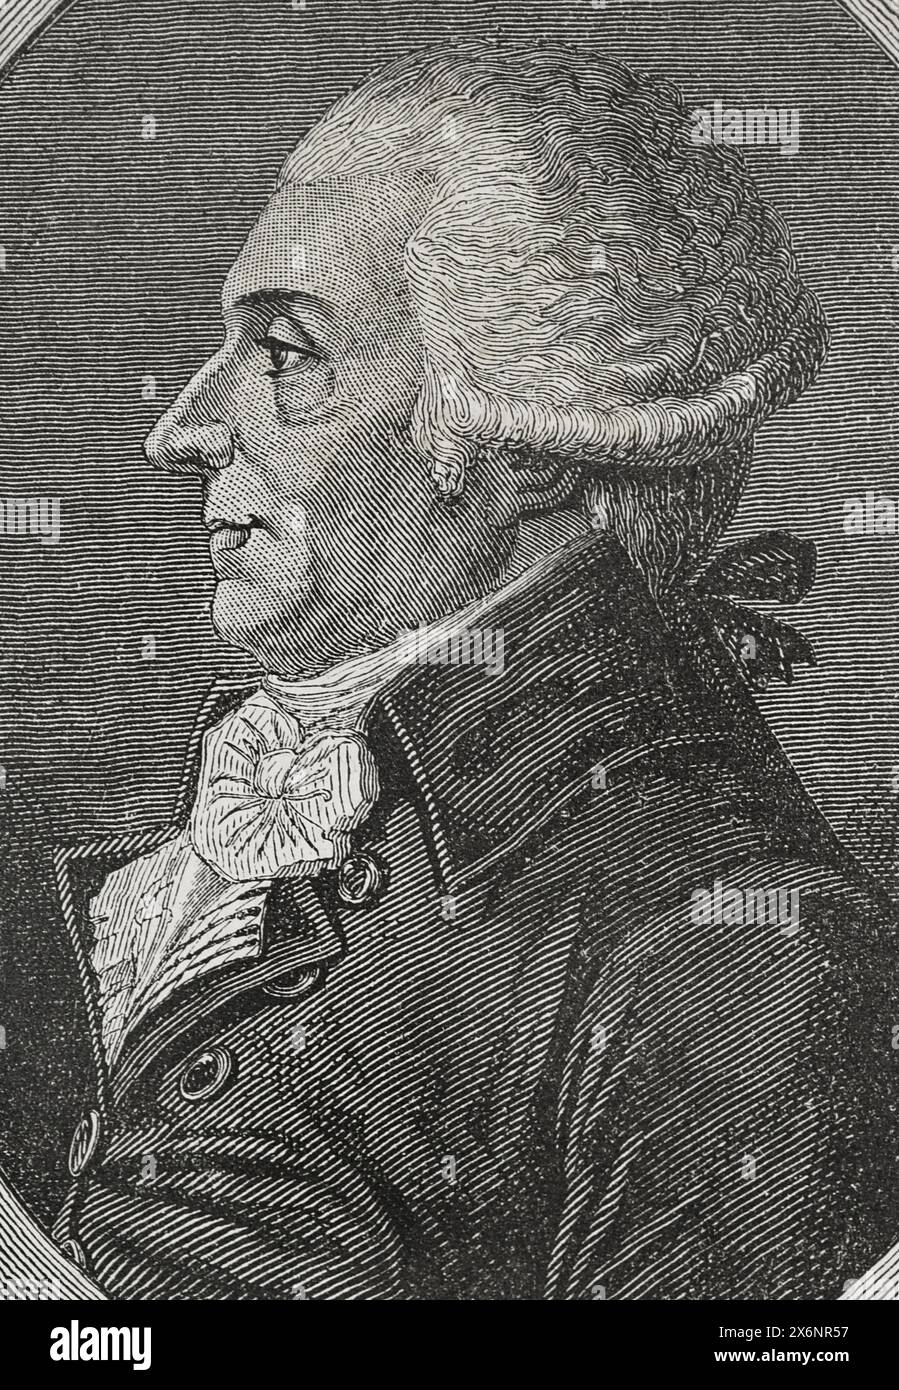 Louis-Bernard Guyton de Morveau (1737-1816). French chemist and politician. During the French Revolution he was a deputy to the Legislative Assembly in 1792, a member of the National Convention and of the Committee of Public Safety in 1793. Portrait. Drawing by Liénard. Engraving by Pannemaker. 'History of the French Revolution'. Volume I, 1876. Stock Photo